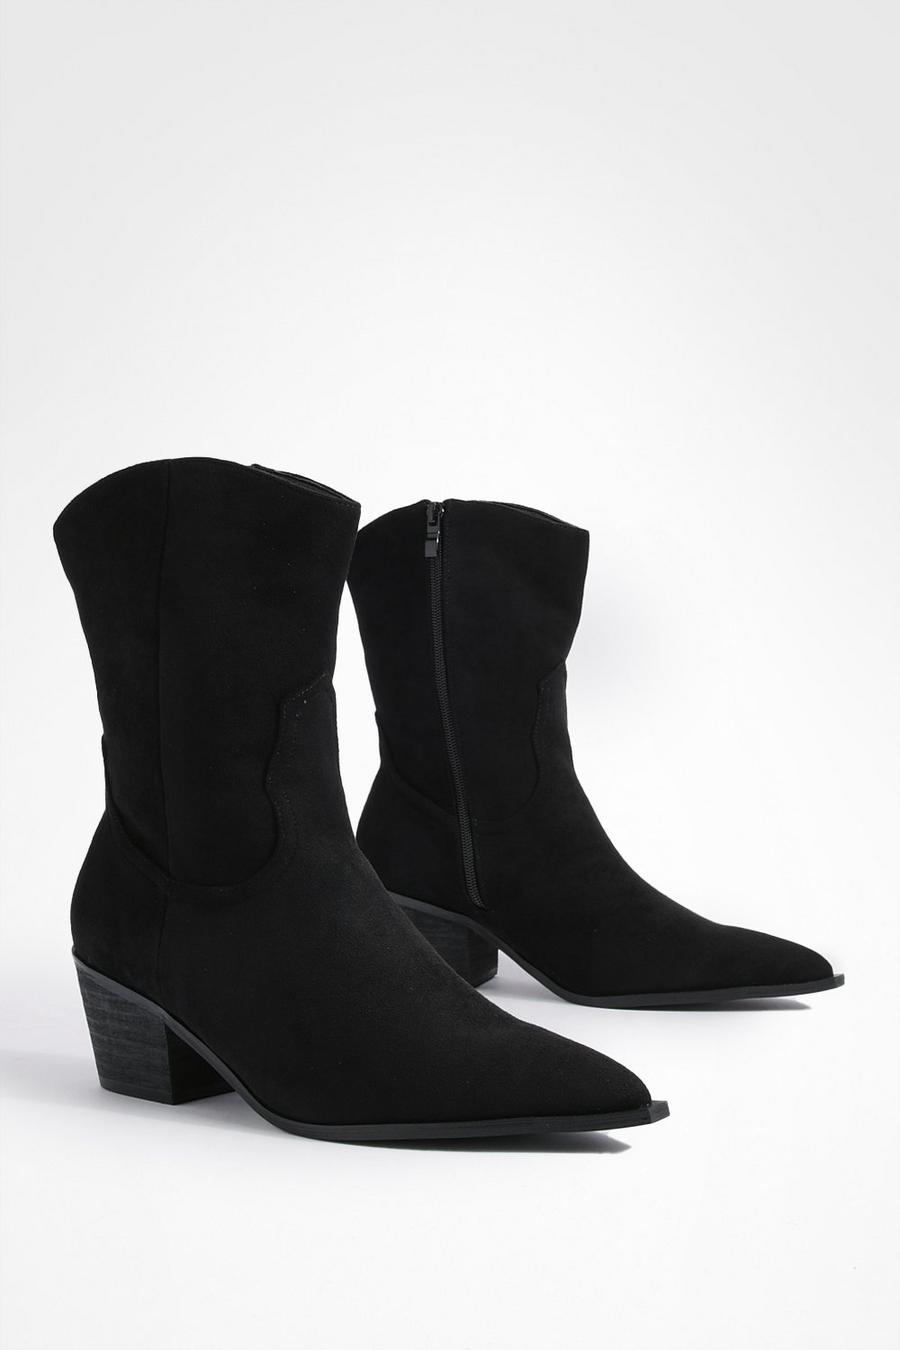 Black Wide Fit Western Ankle Cowboy Boots